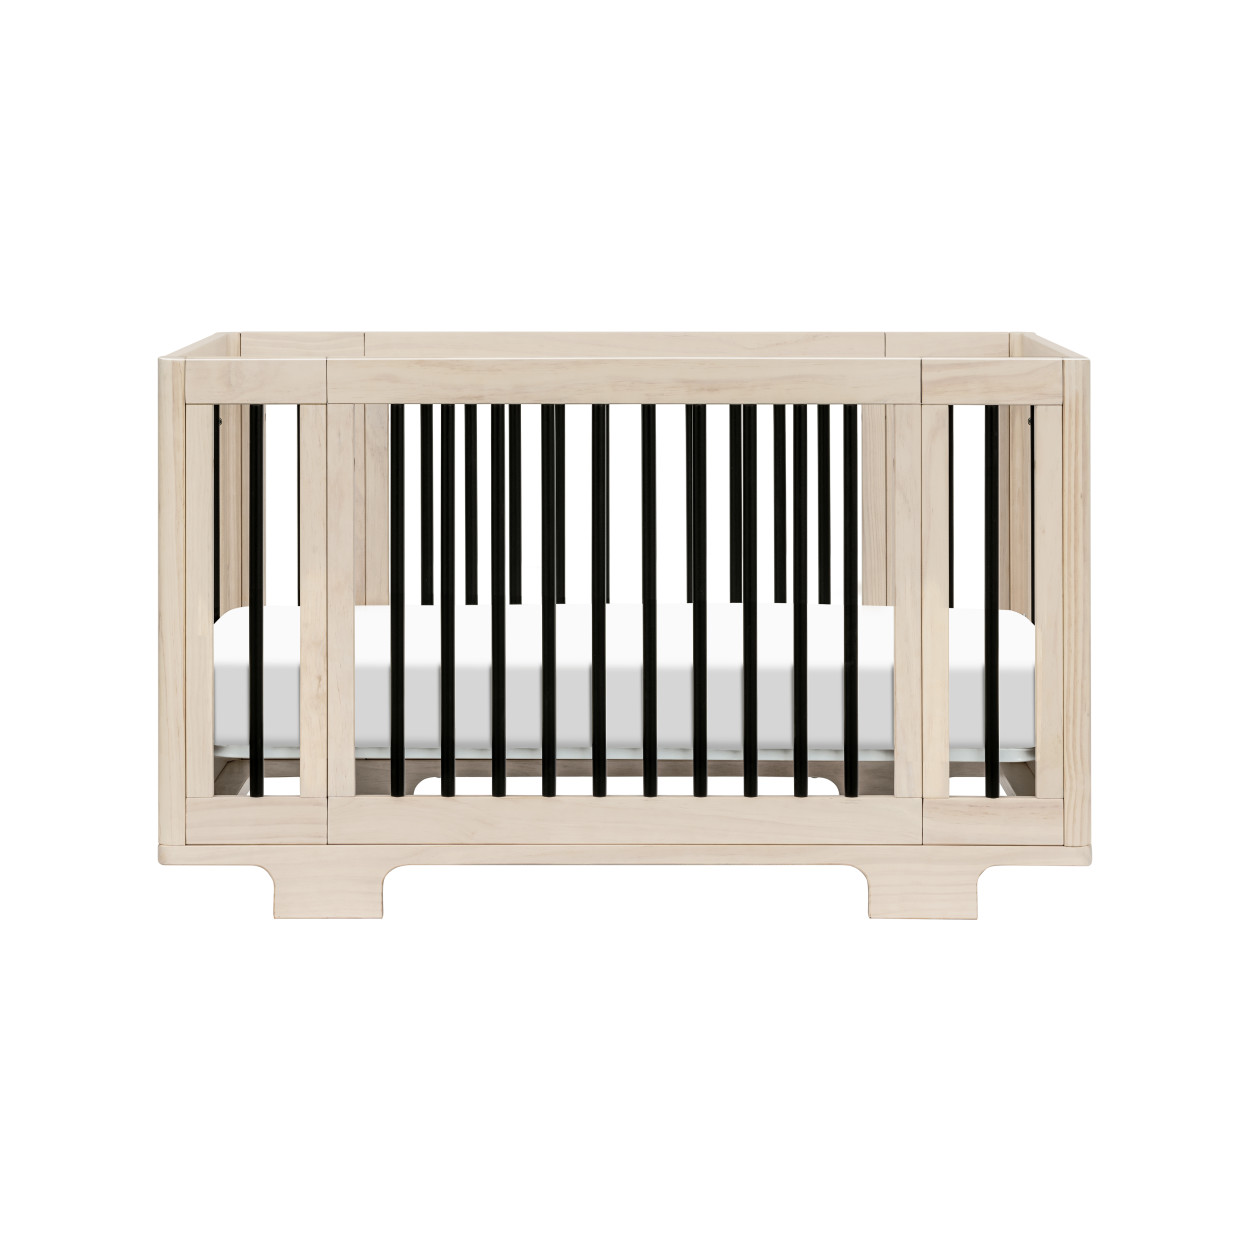 BabyLetto Yuzu 8-in-1 Convertible Crib - Washed Natural/Black